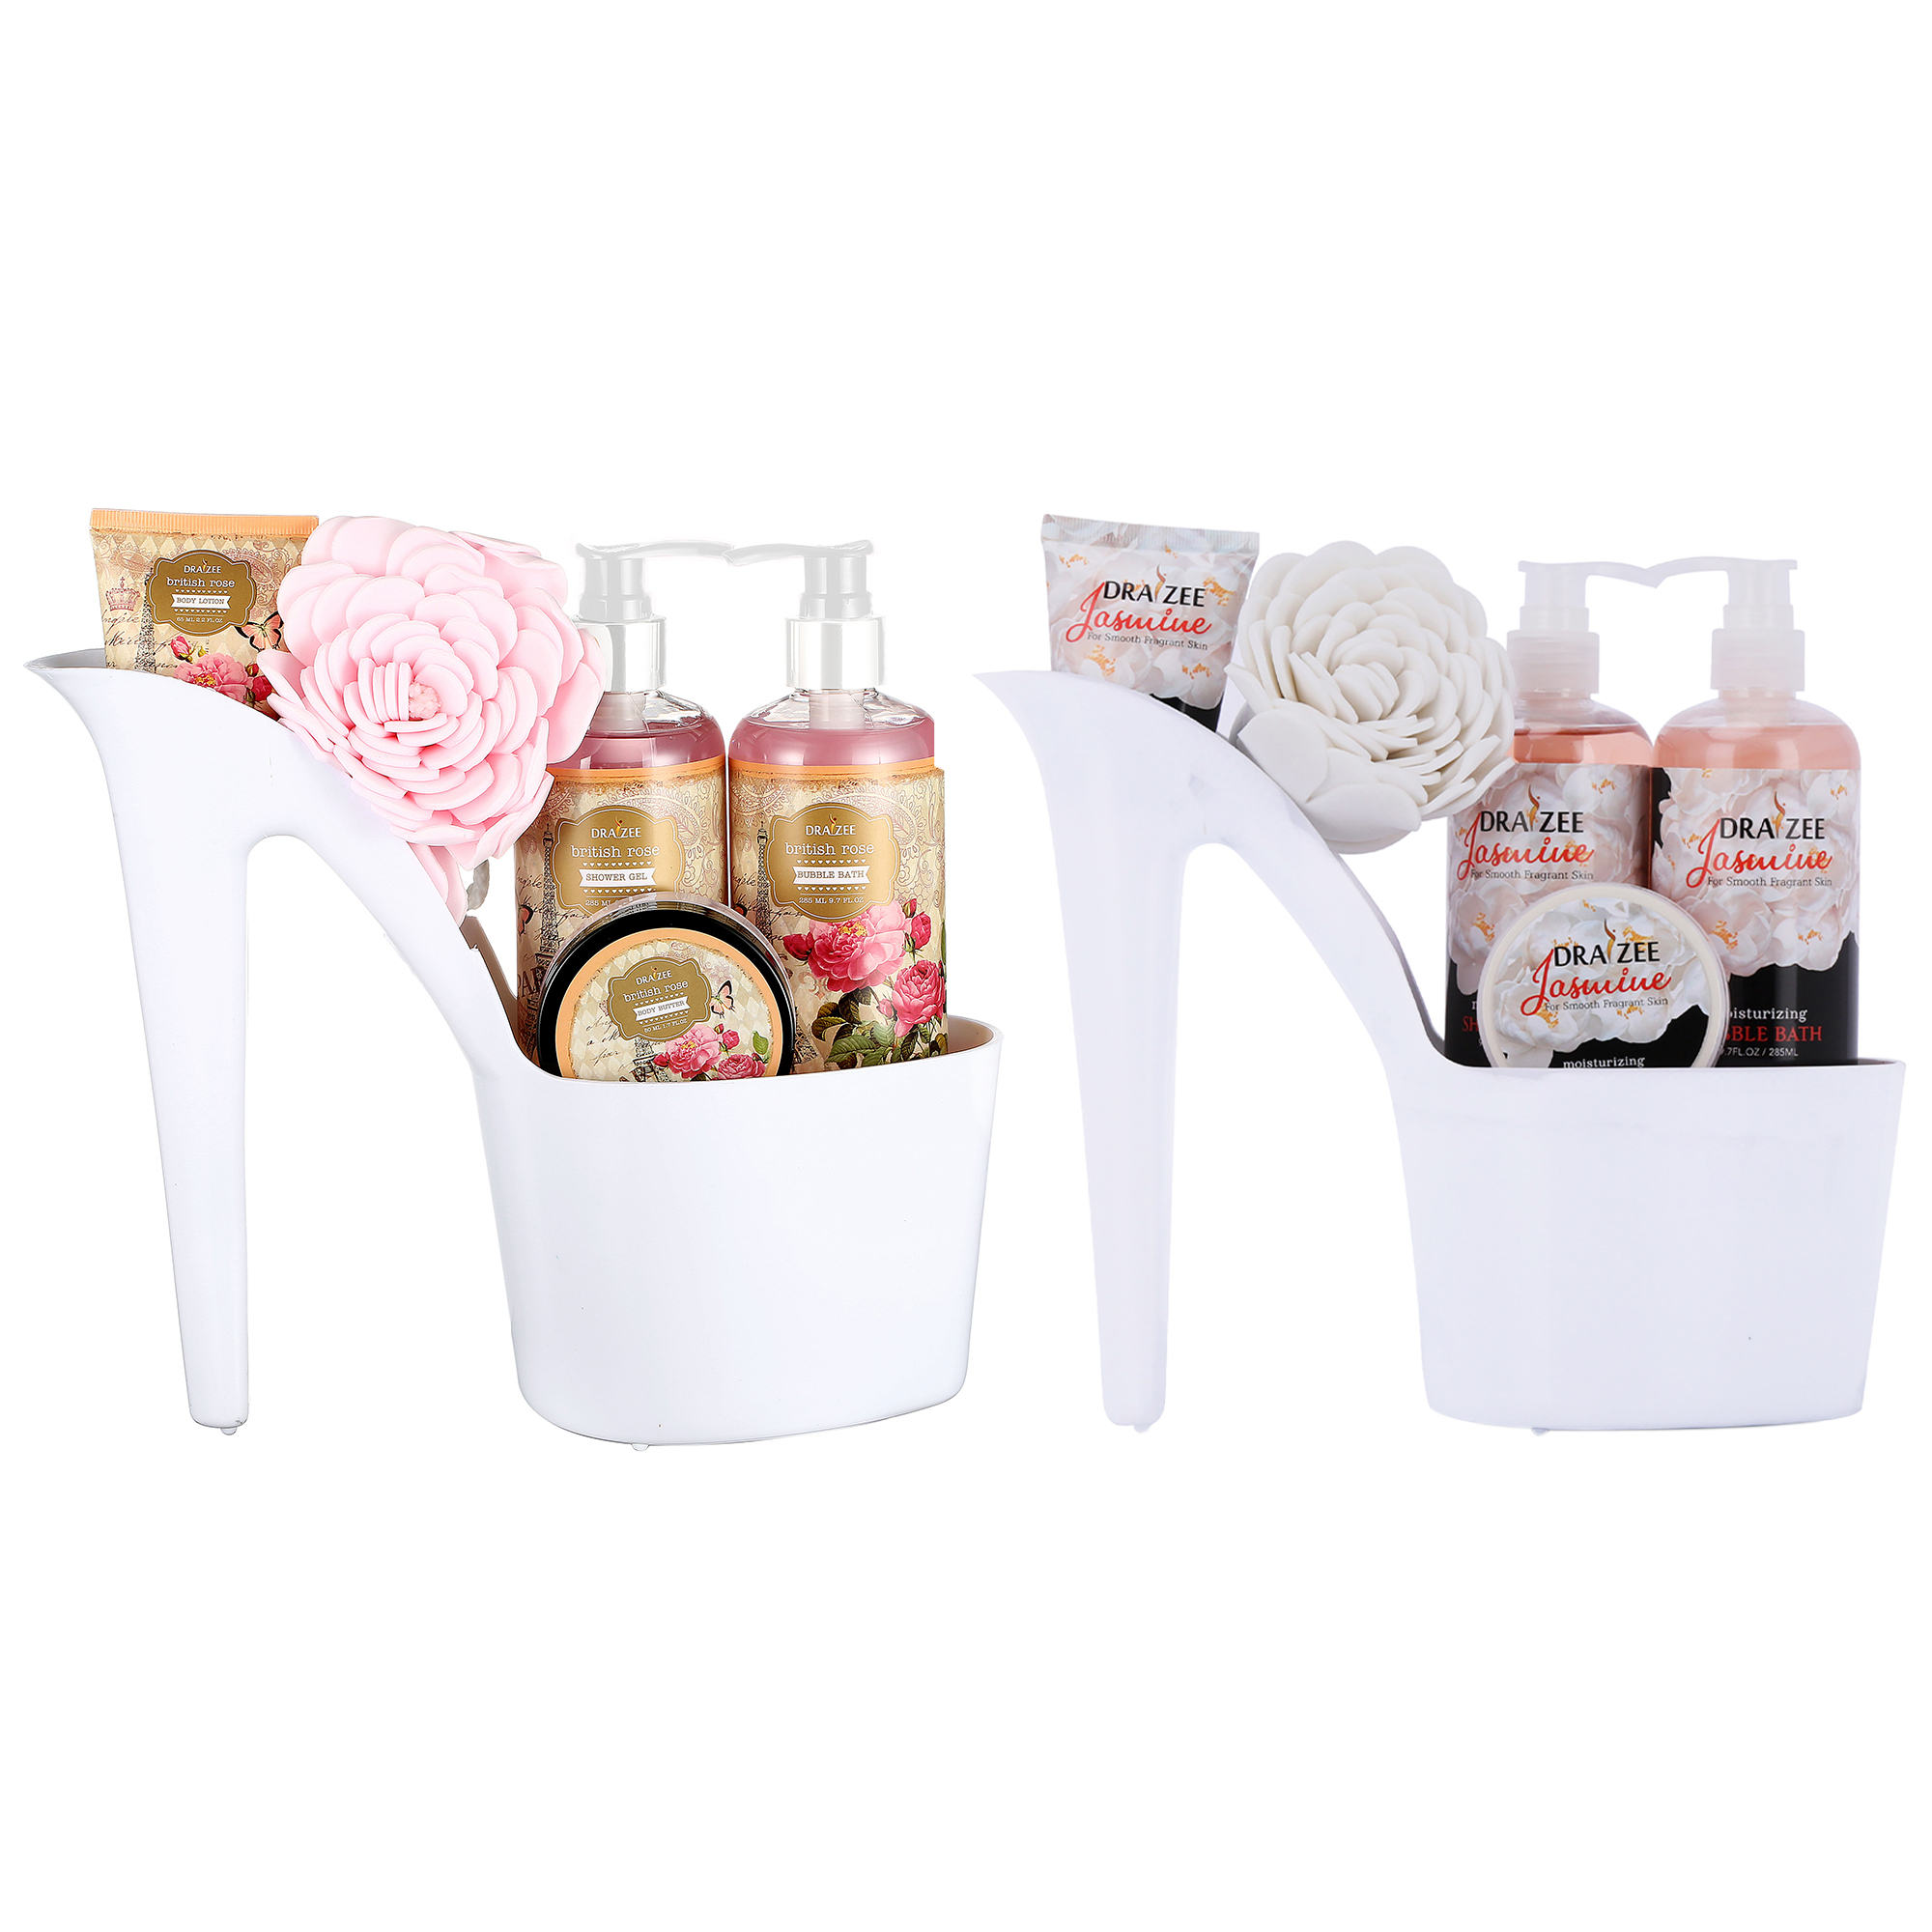 Set Of 2 Draizee 10 Pcs Scented Spa Gift Basket Rose, Jasmine With Shower Gel, Bubble Bath, Body Butter & Lotion, Soft Bath Puff